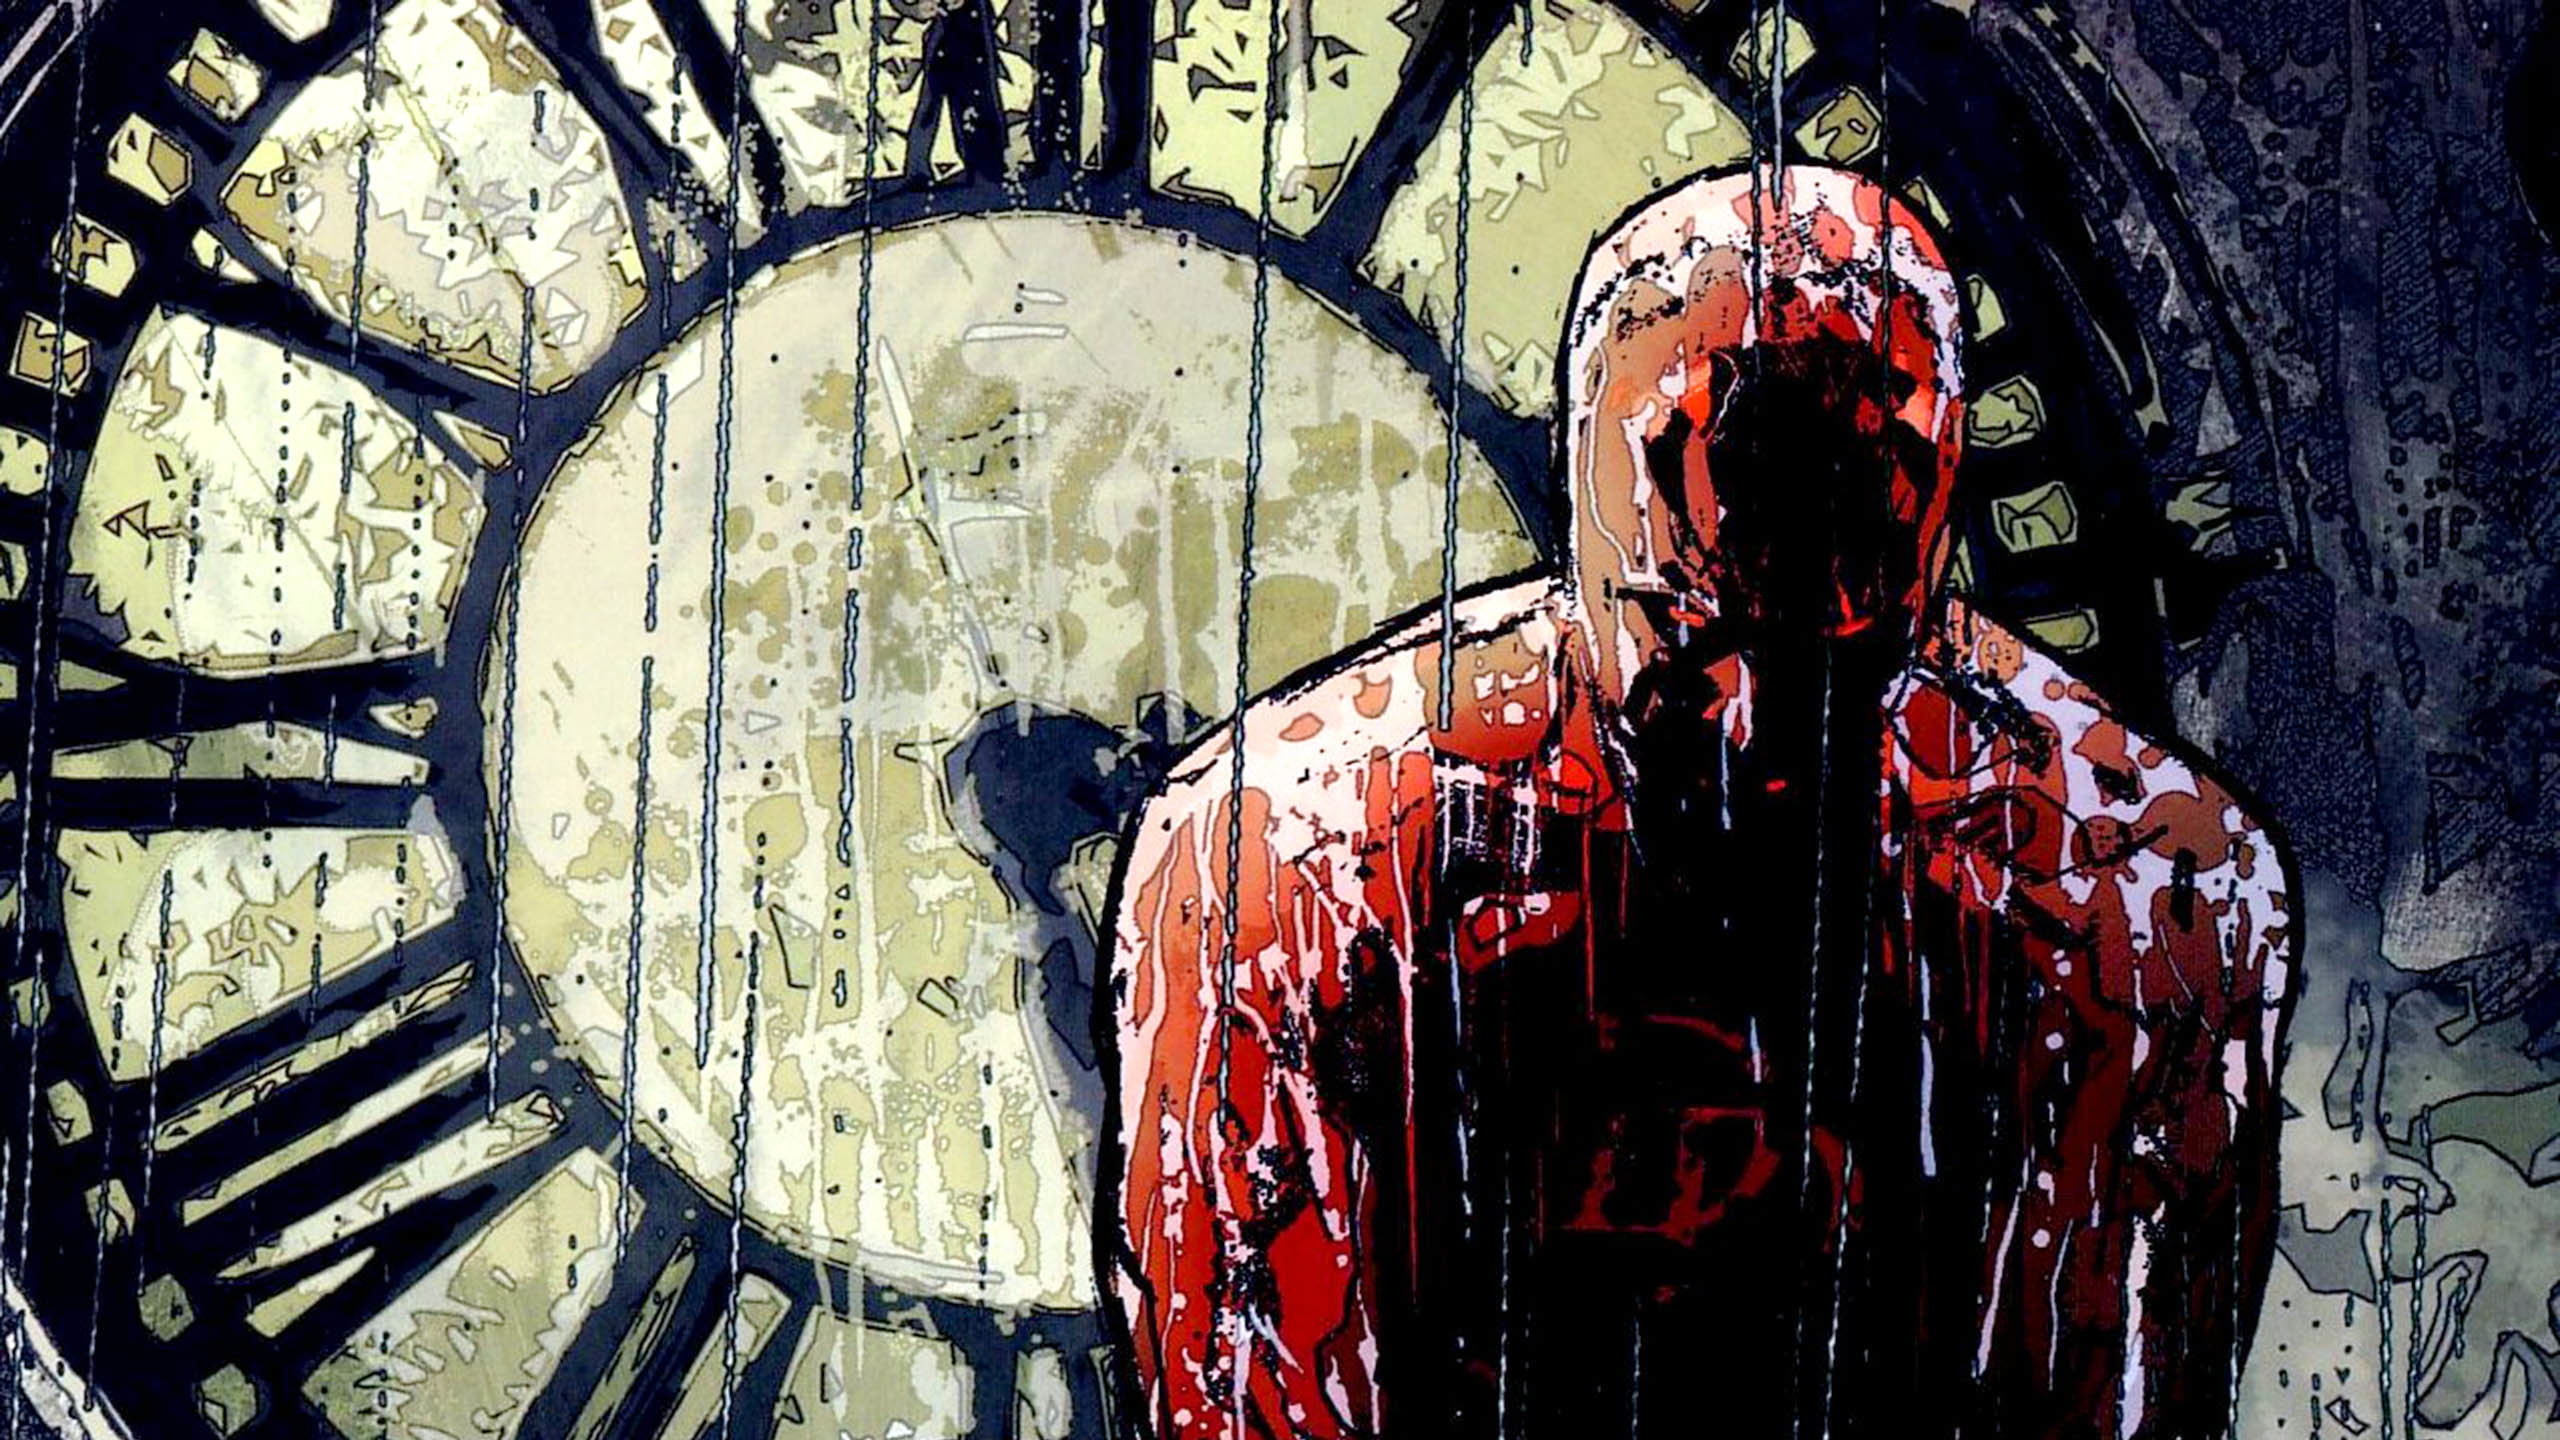 2560x1440 Films-Daredevil-Wallpapers-High-Resolution